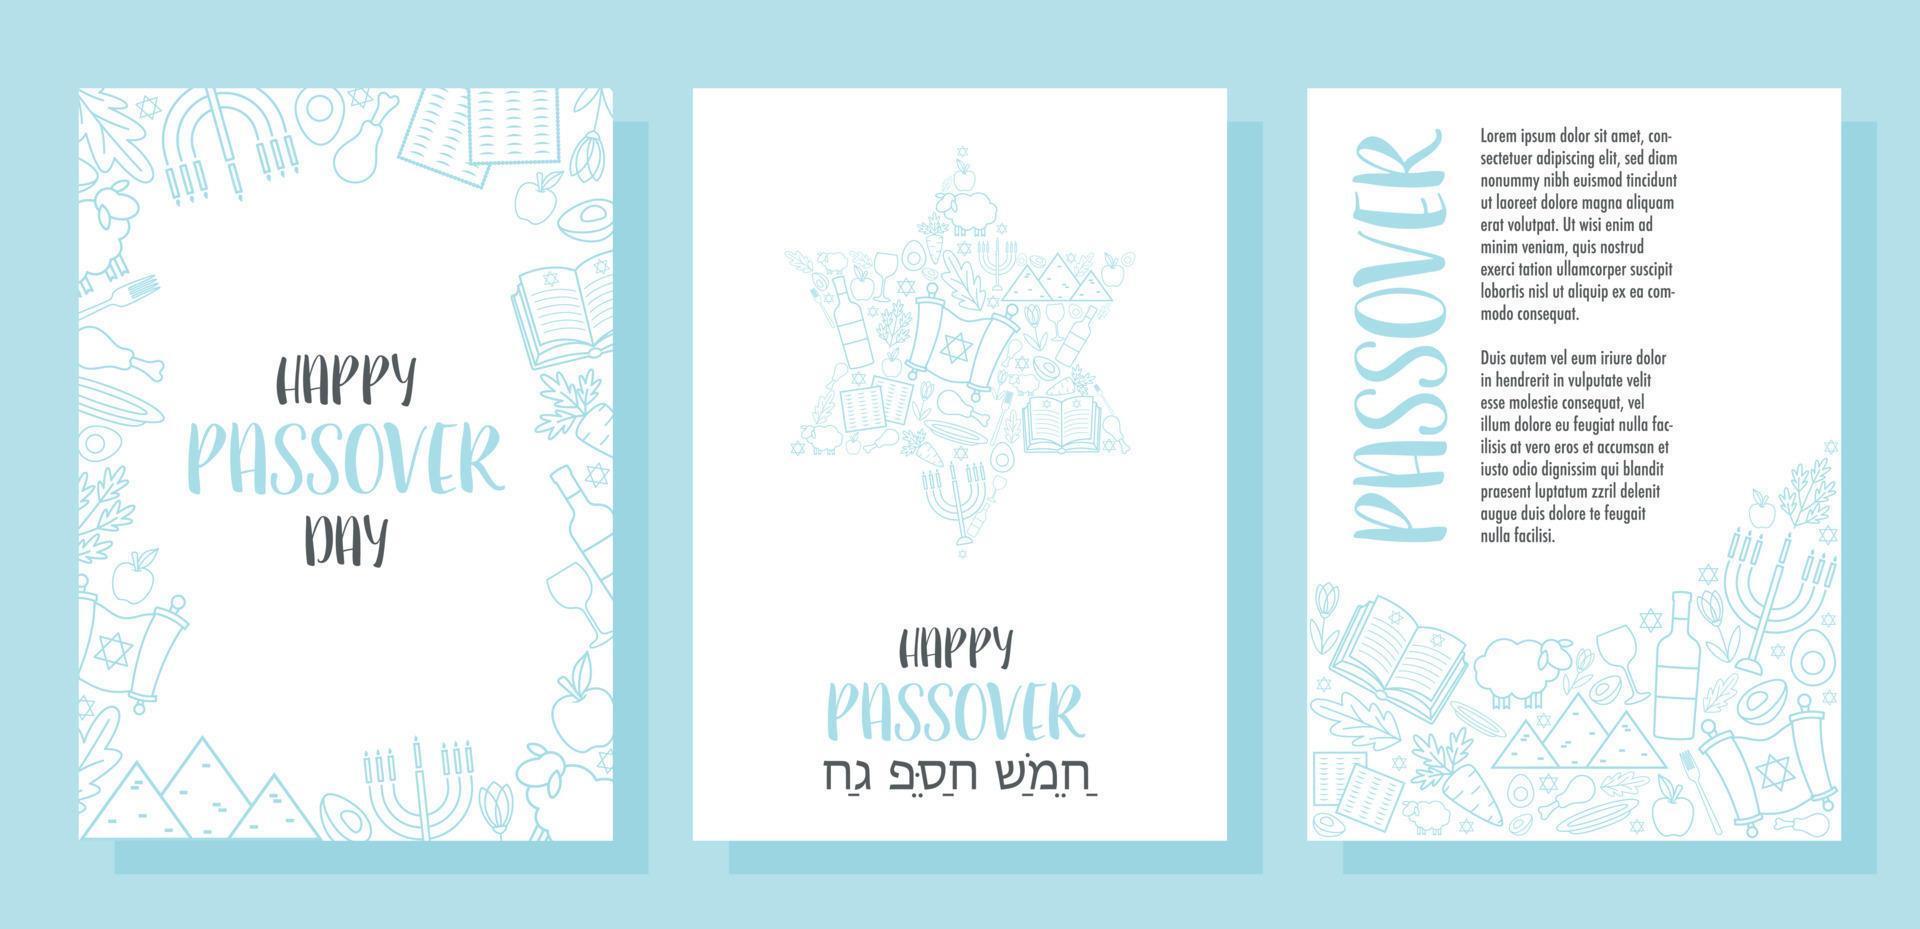 Happy Passover Pesach day greeting cards set vector